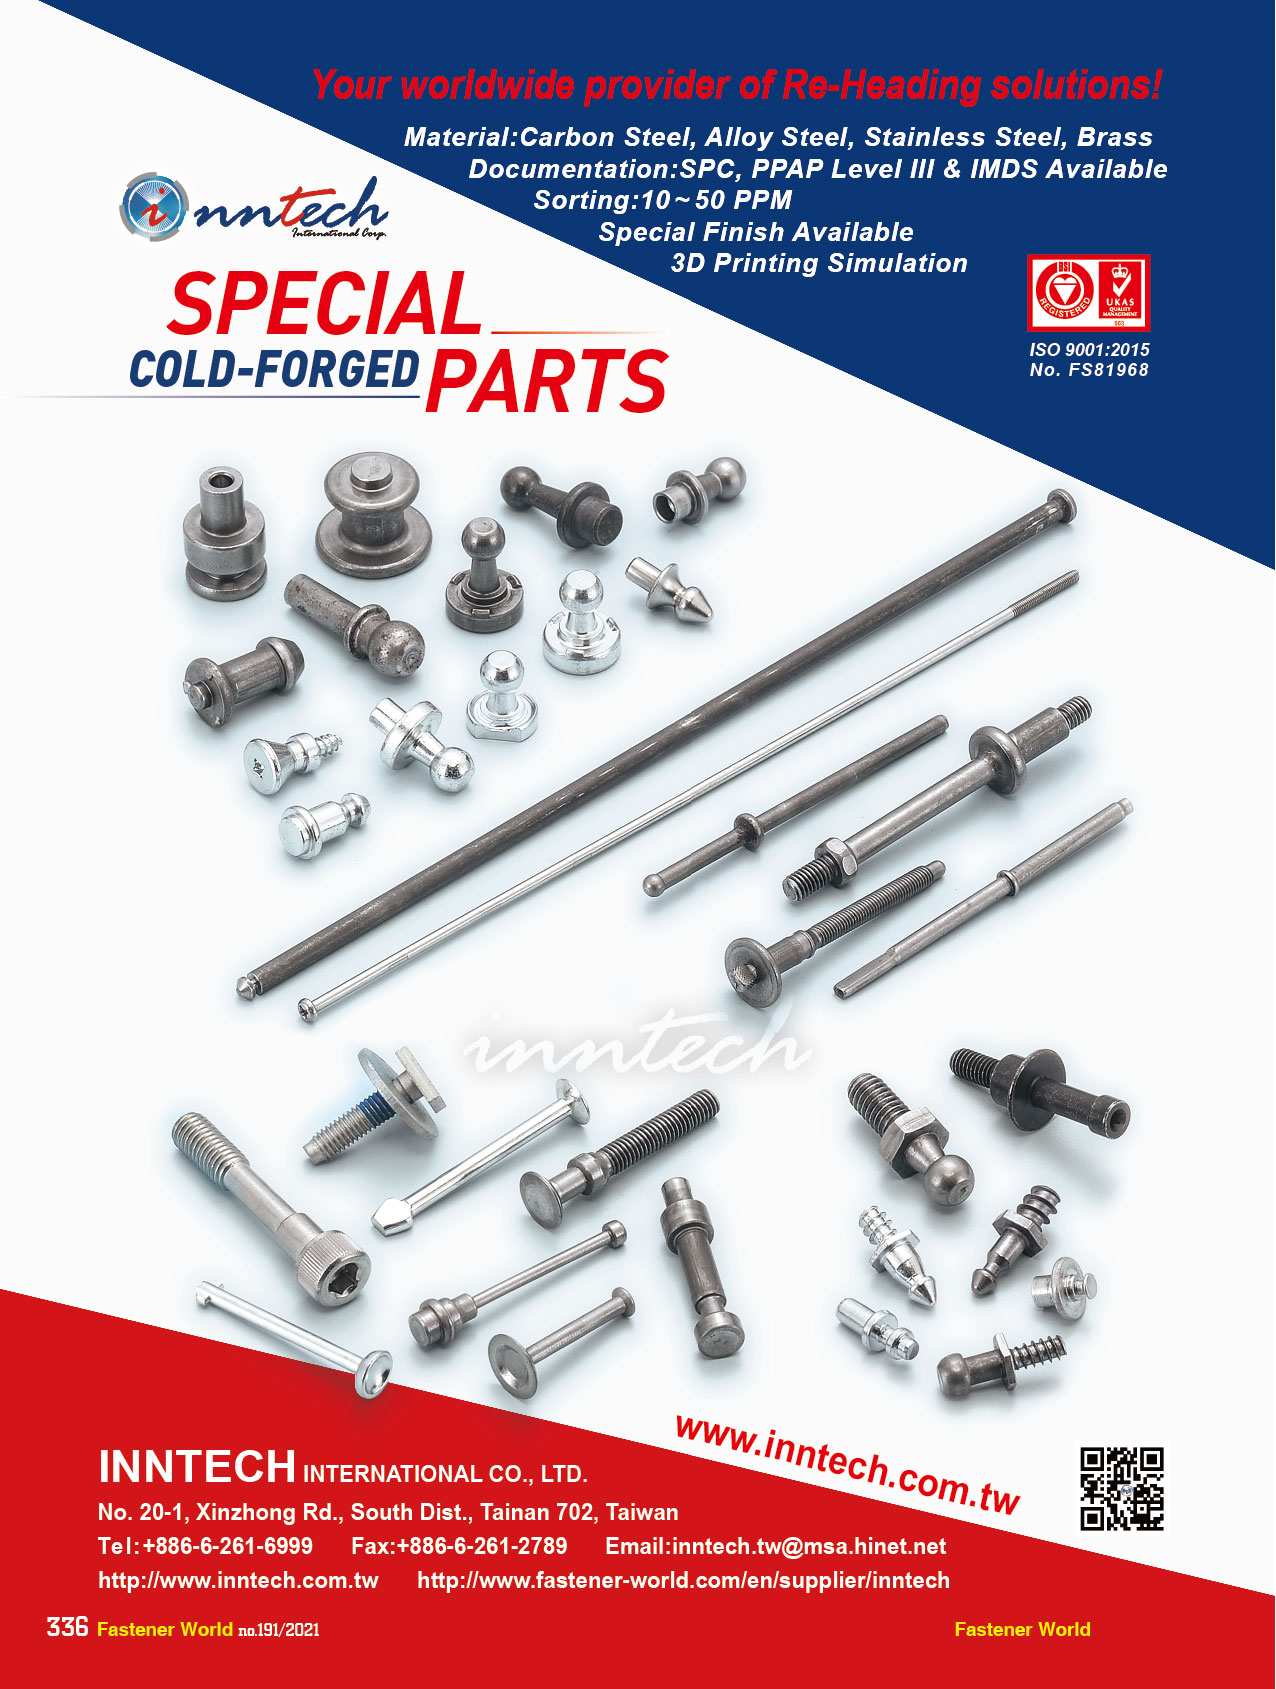 INNTECH INTERNATIONAL CO., LTD.  , OEM Quality Fasteners, Precision Turning, Metal Stamping, Patent, Open Die, Casting, Plastic Injection Molding, Metal Injection Molding, Powder Metal, Glass To Metal Seal, Wire Form, Second Operation, Spring, Assembly , Special Cold / Hot Forming Parts